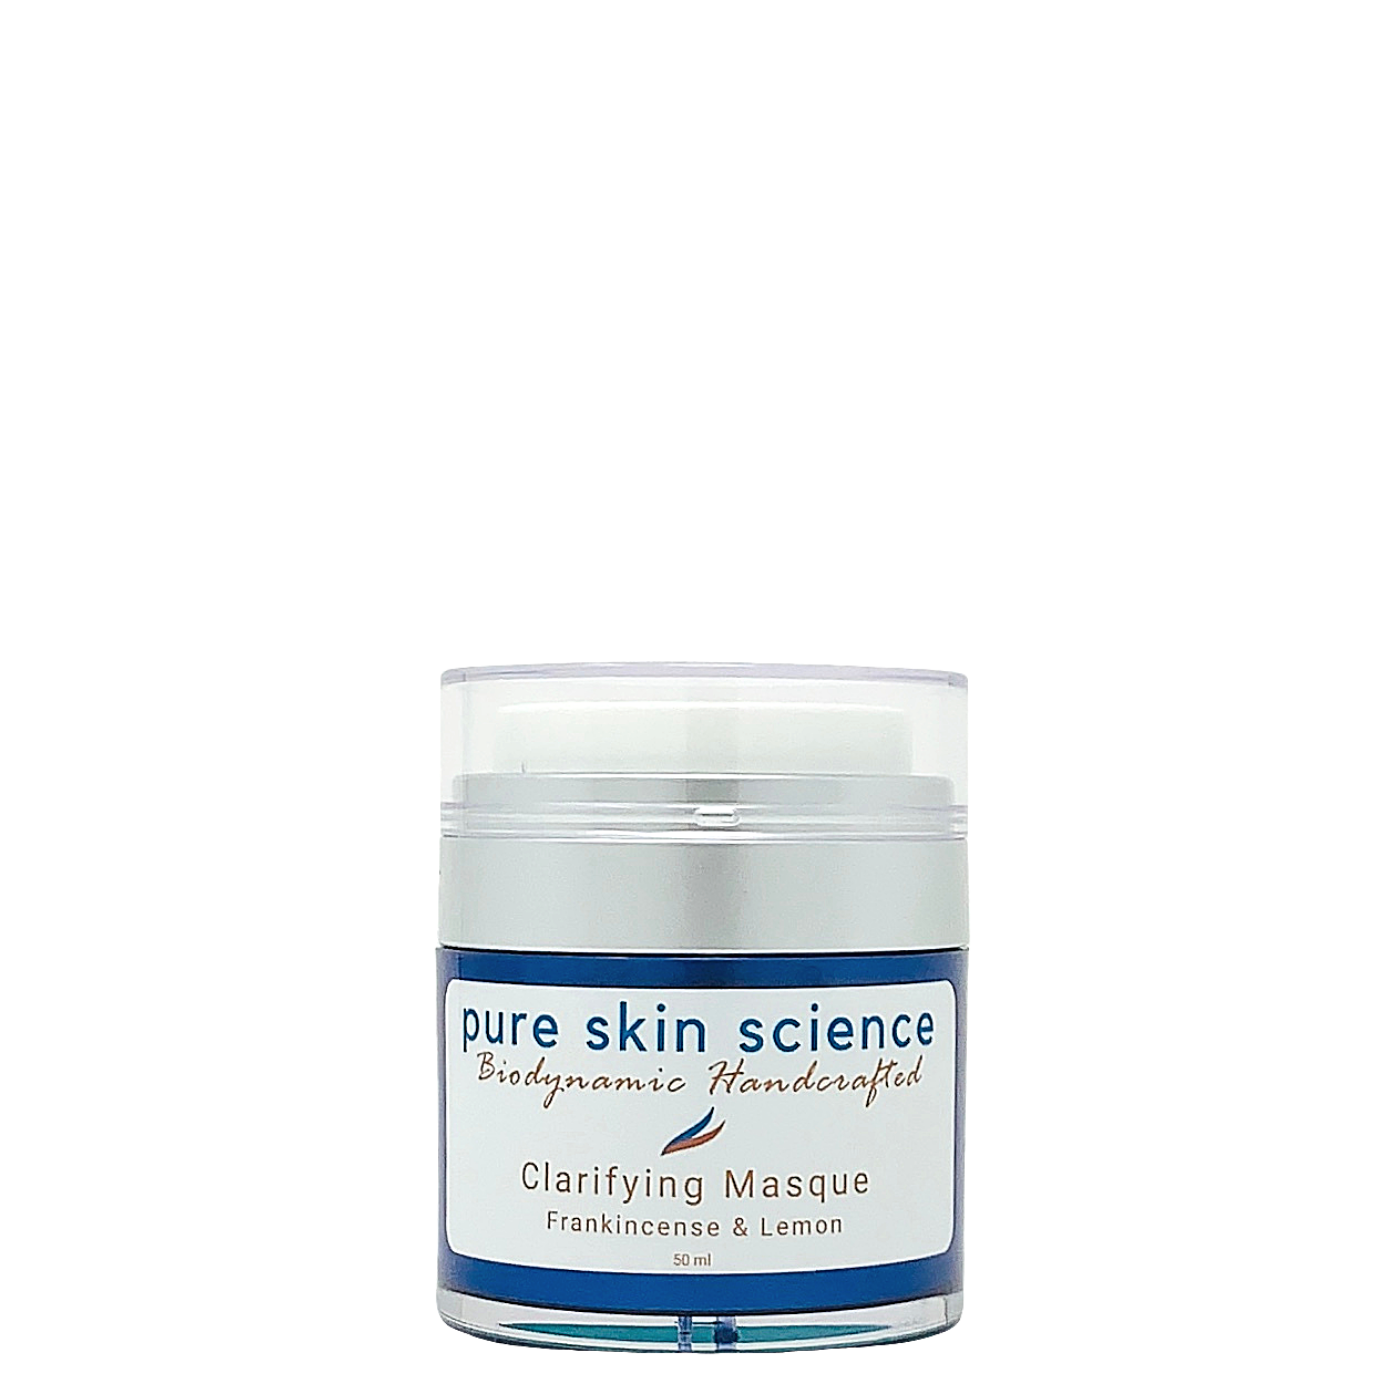 Clarifying Masque by Pure Skin Science